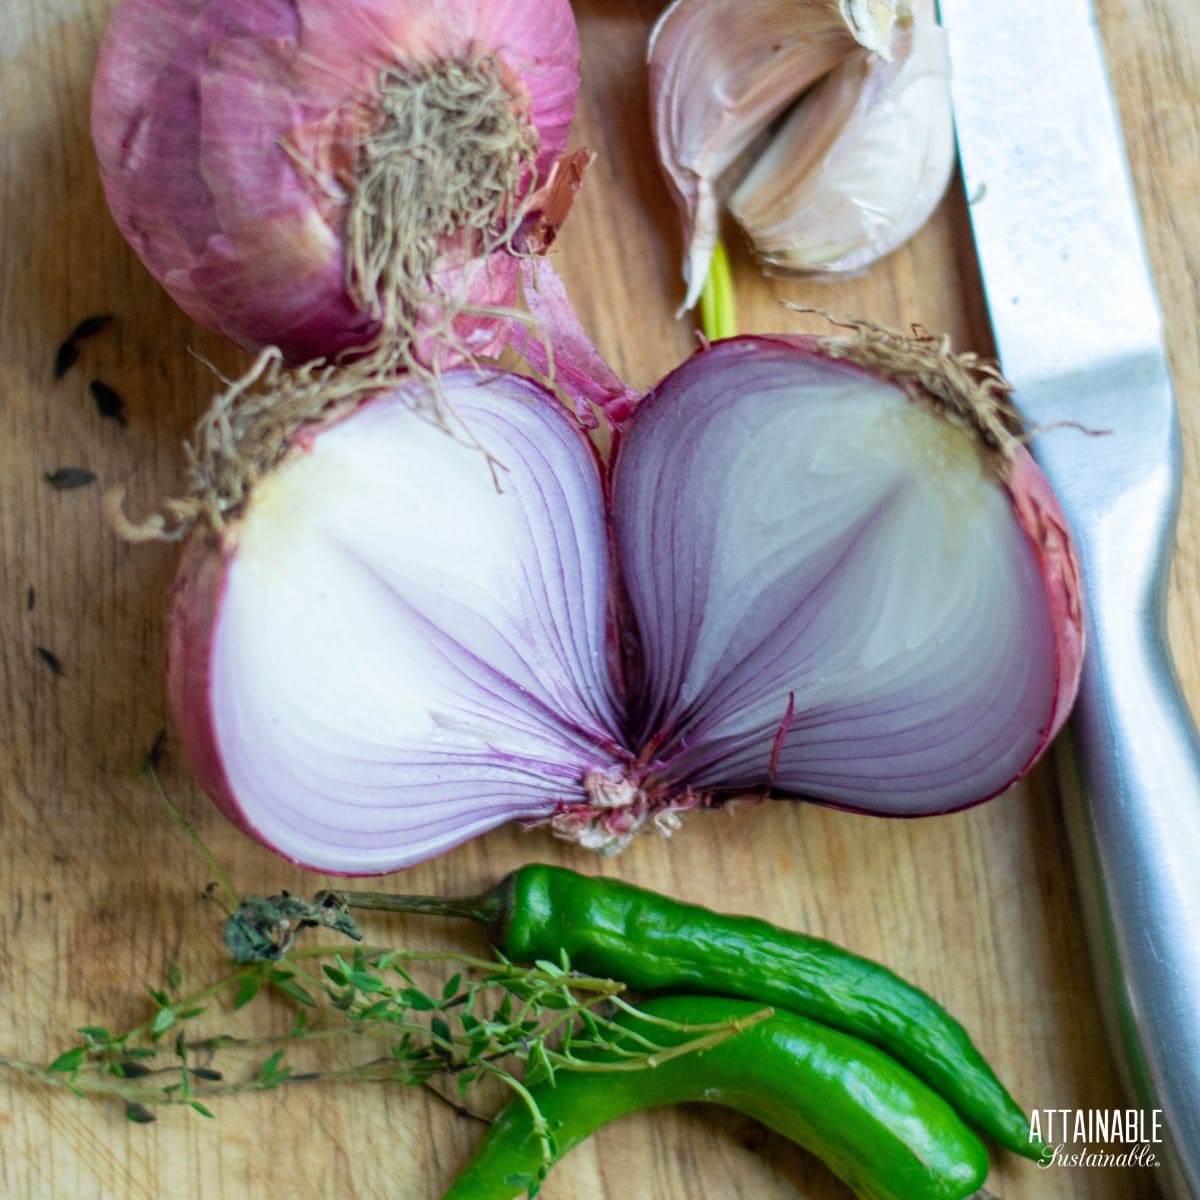 ingredients for making pickled onions.